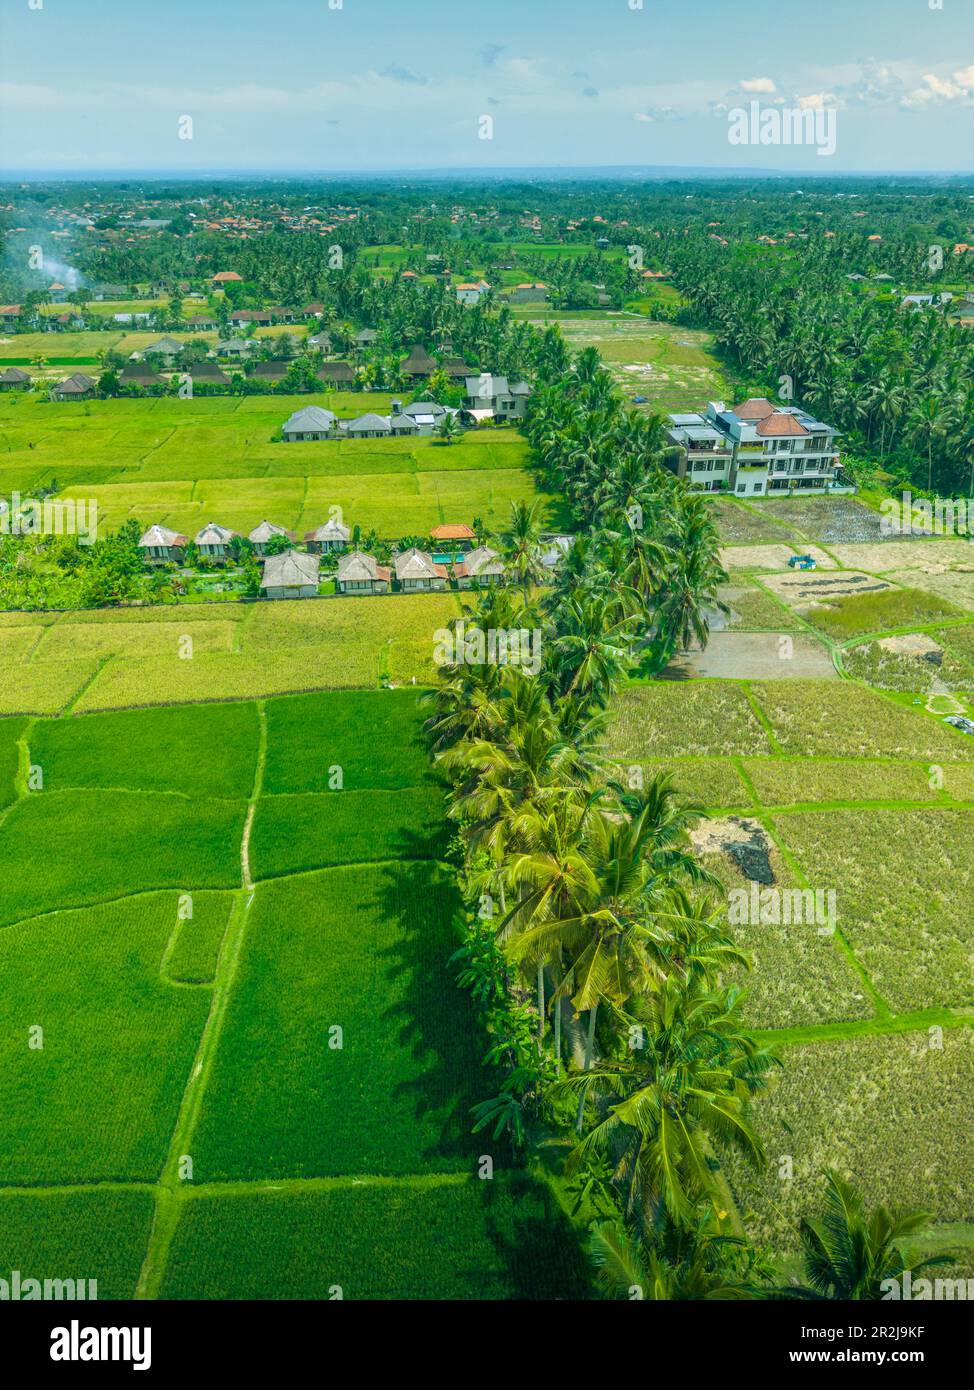 Aerial view of Kajeng Rice Field, Gianyar Regency, Bali, Indonesia, South East Asia, Asia Stock Photo